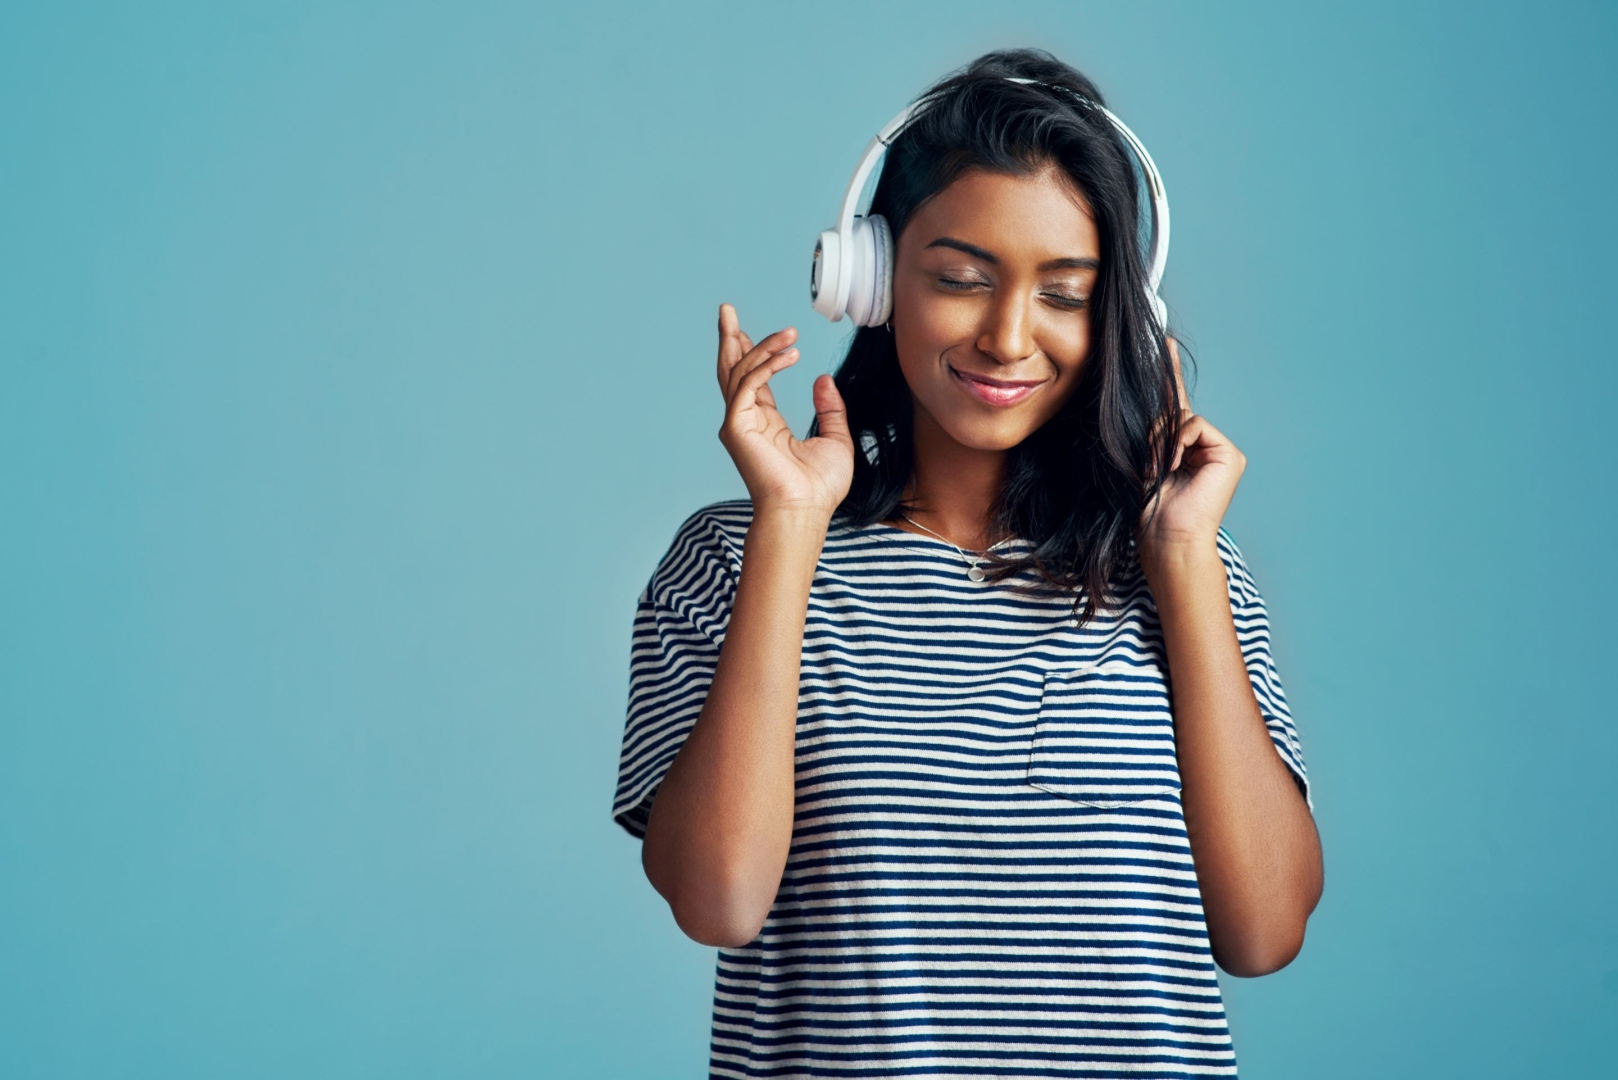 ﻿Loud music may be damaging ears of 1 billion youngsters